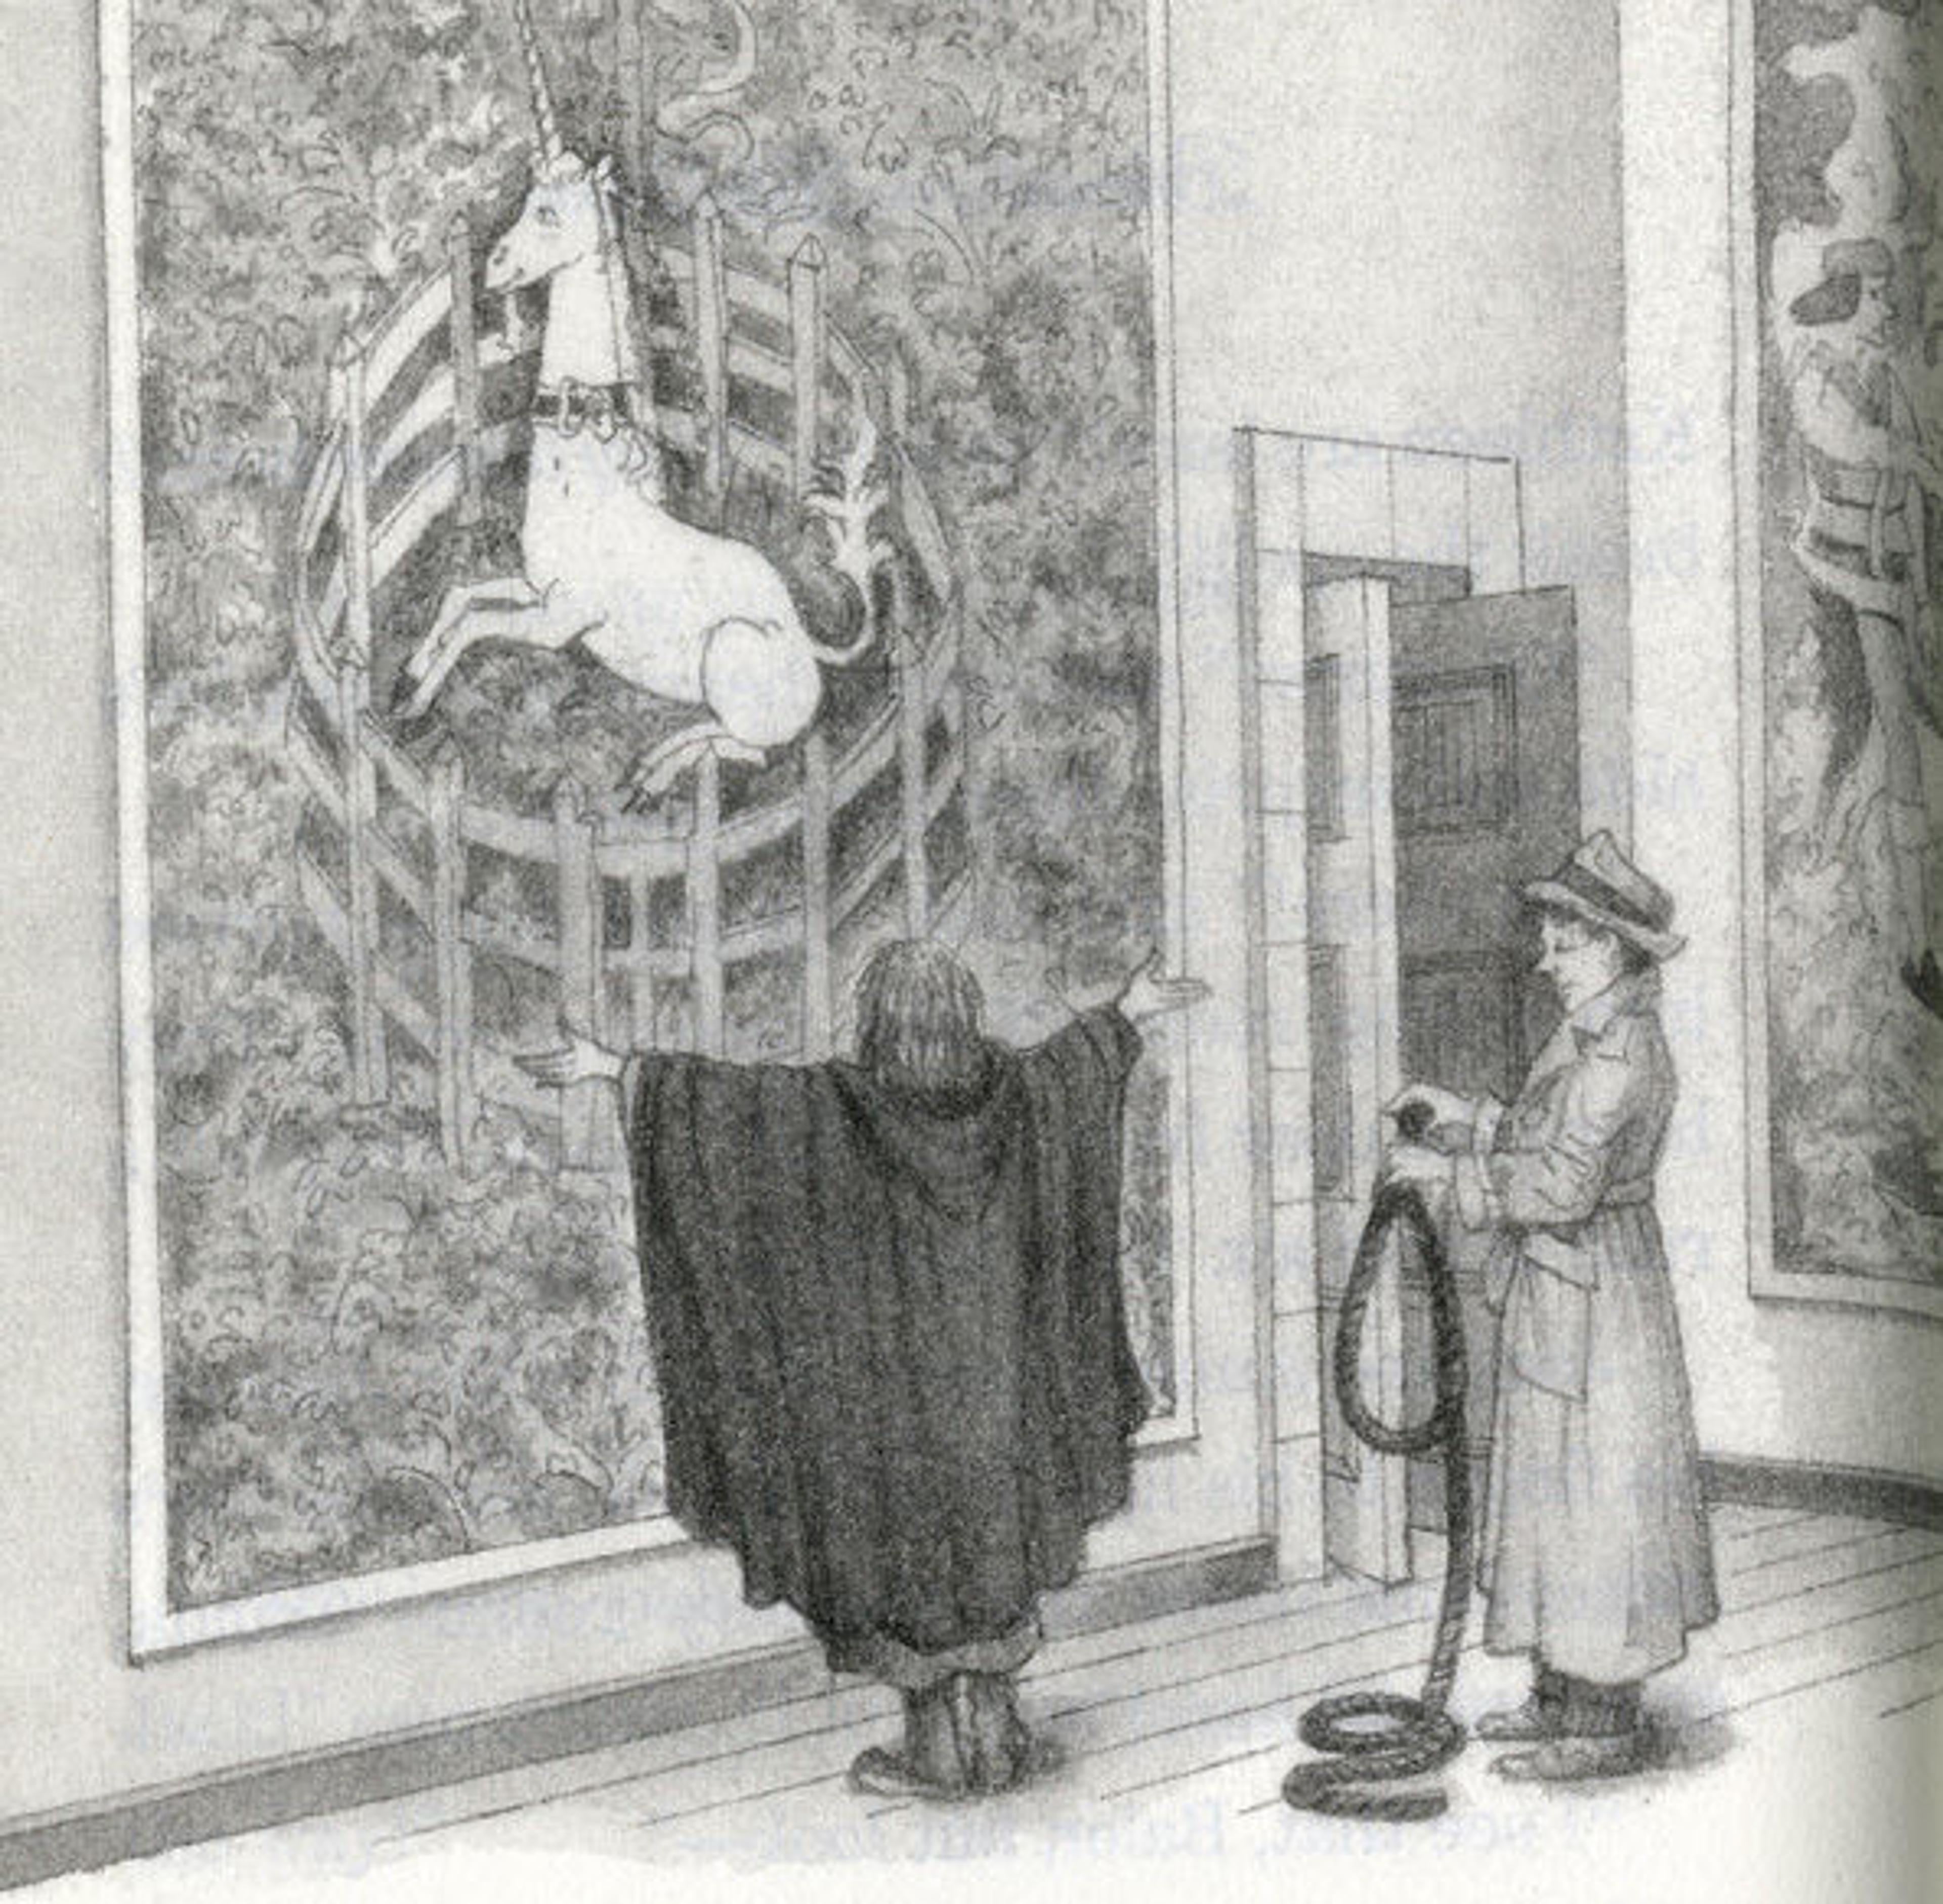 The characters Grinda and Balor attempt to awaken the Unicorn in Captivity (37.80.6) in Blizzard of the Blue Moon (New York: Random House, 2006).